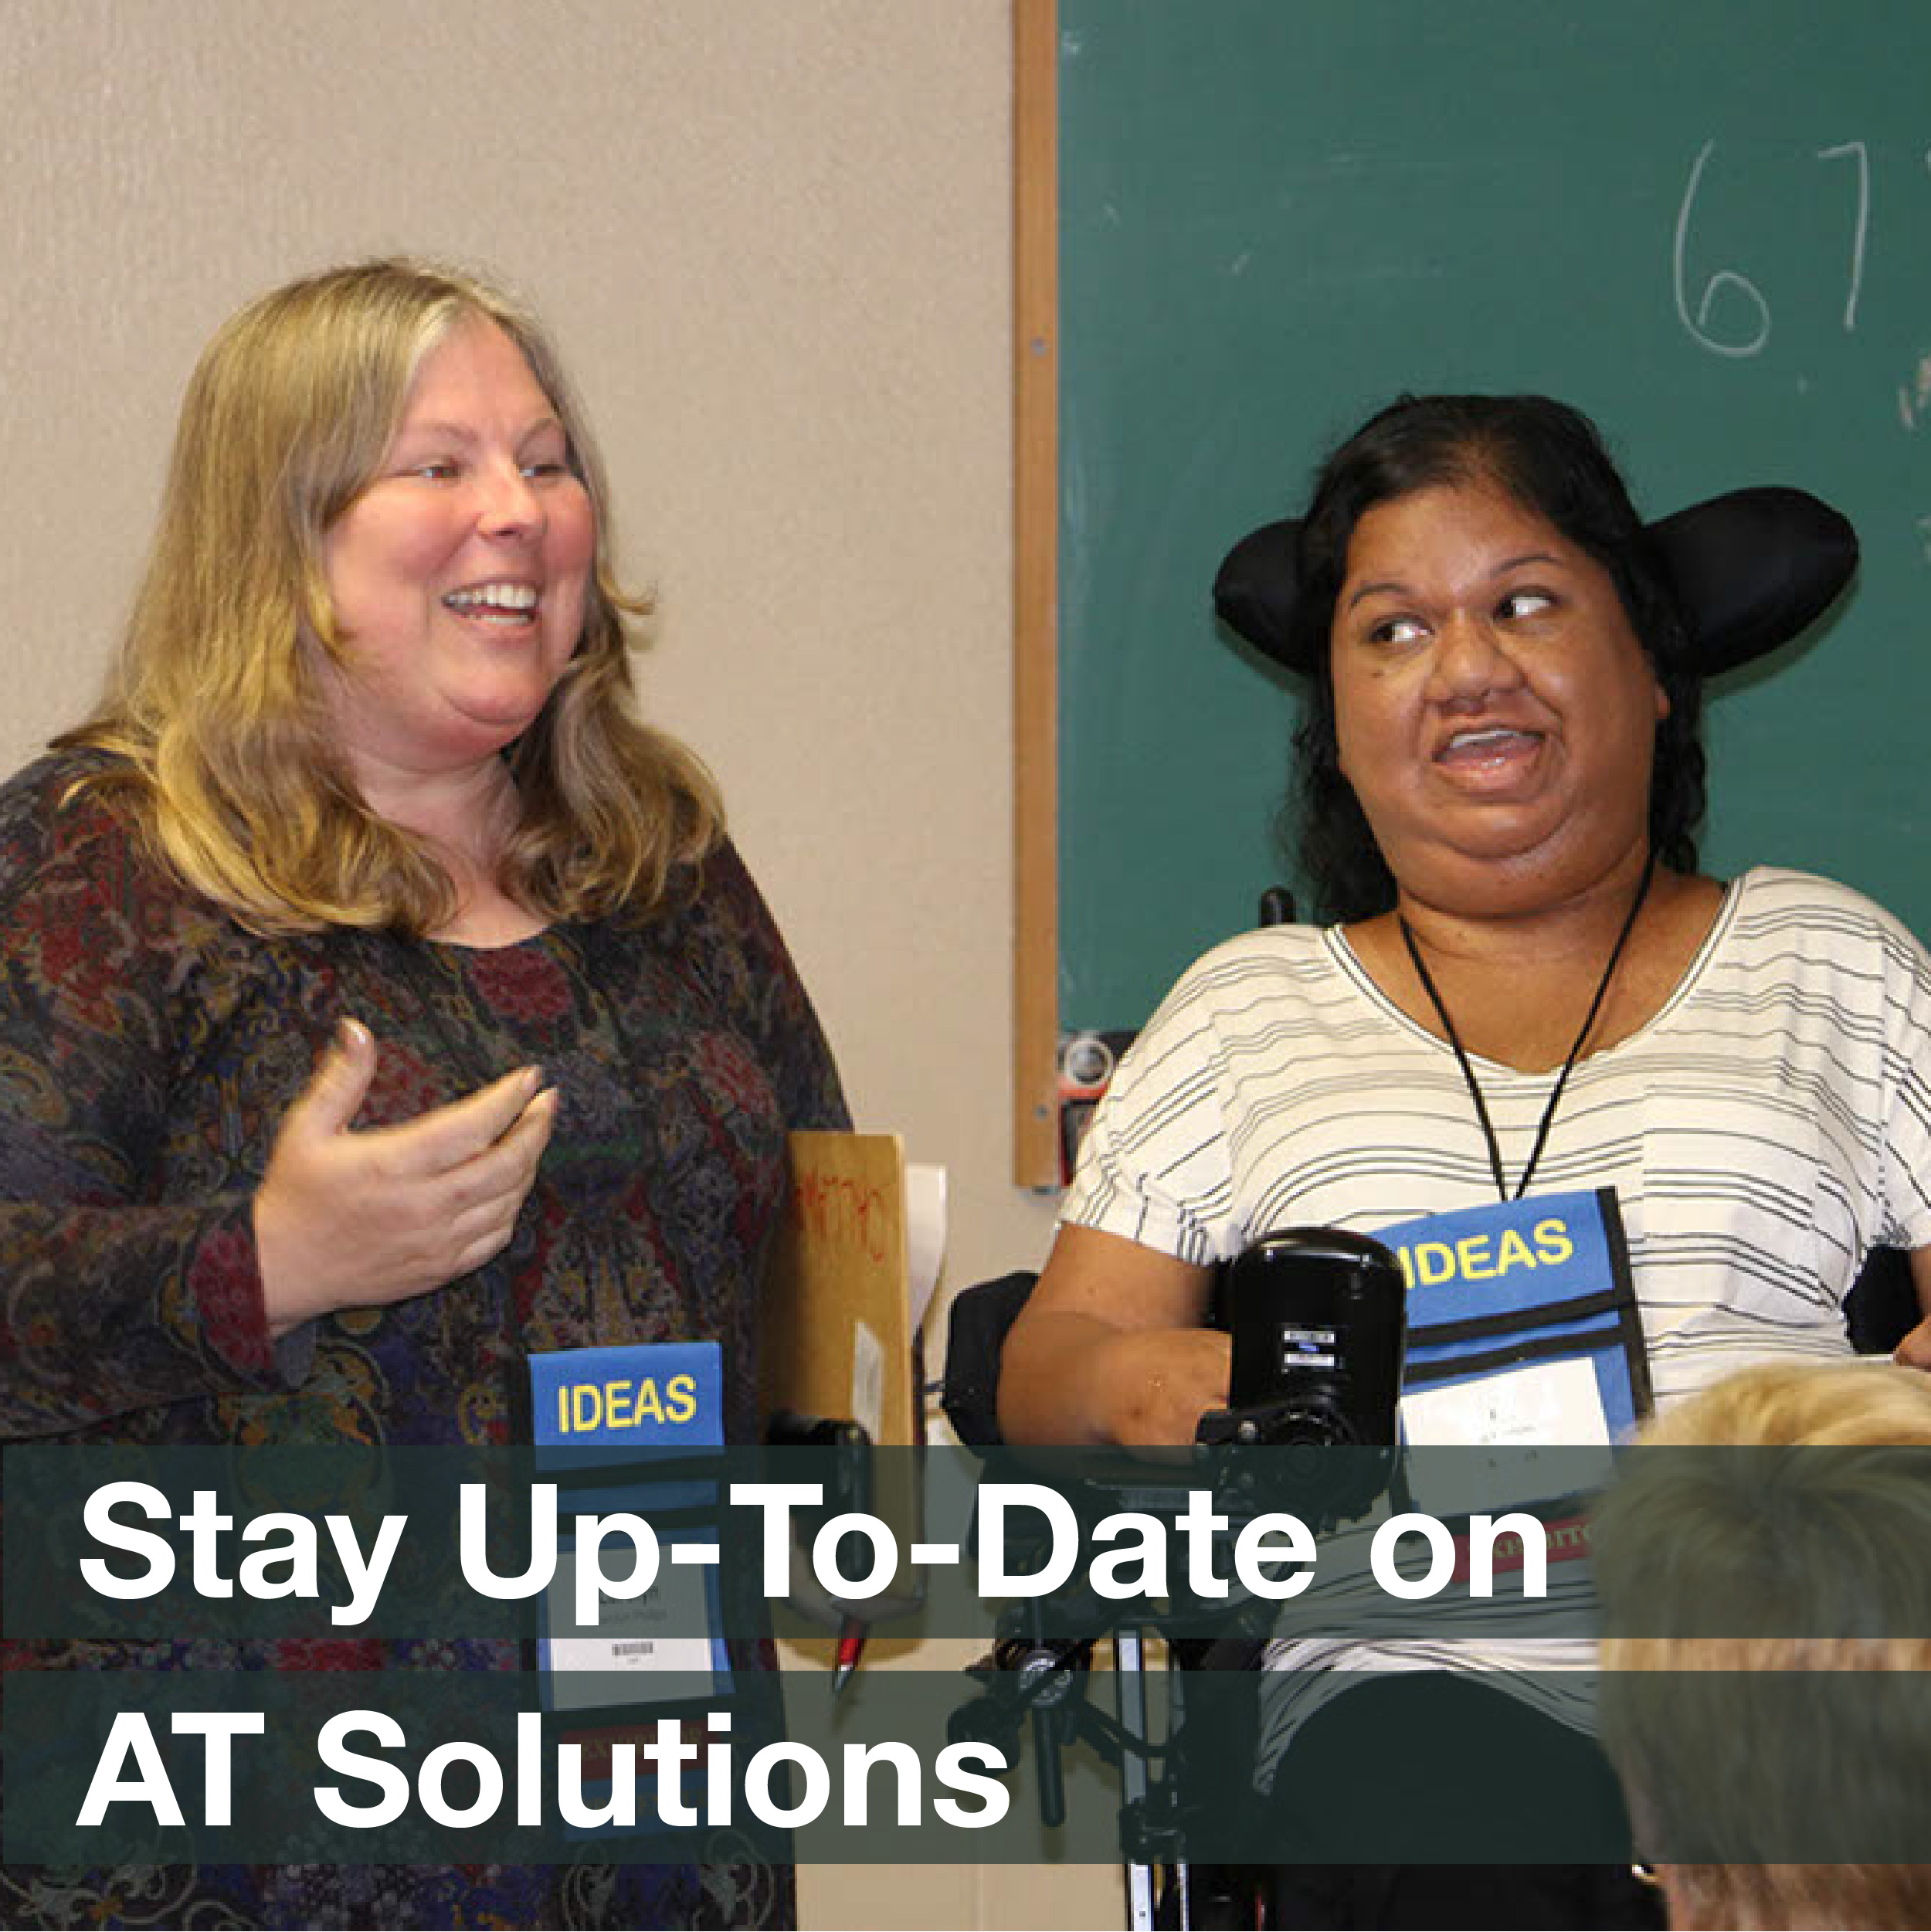 Two women standing in front of a group and speaking, accompanied by the phrase “Stay up to date on AT solutions”